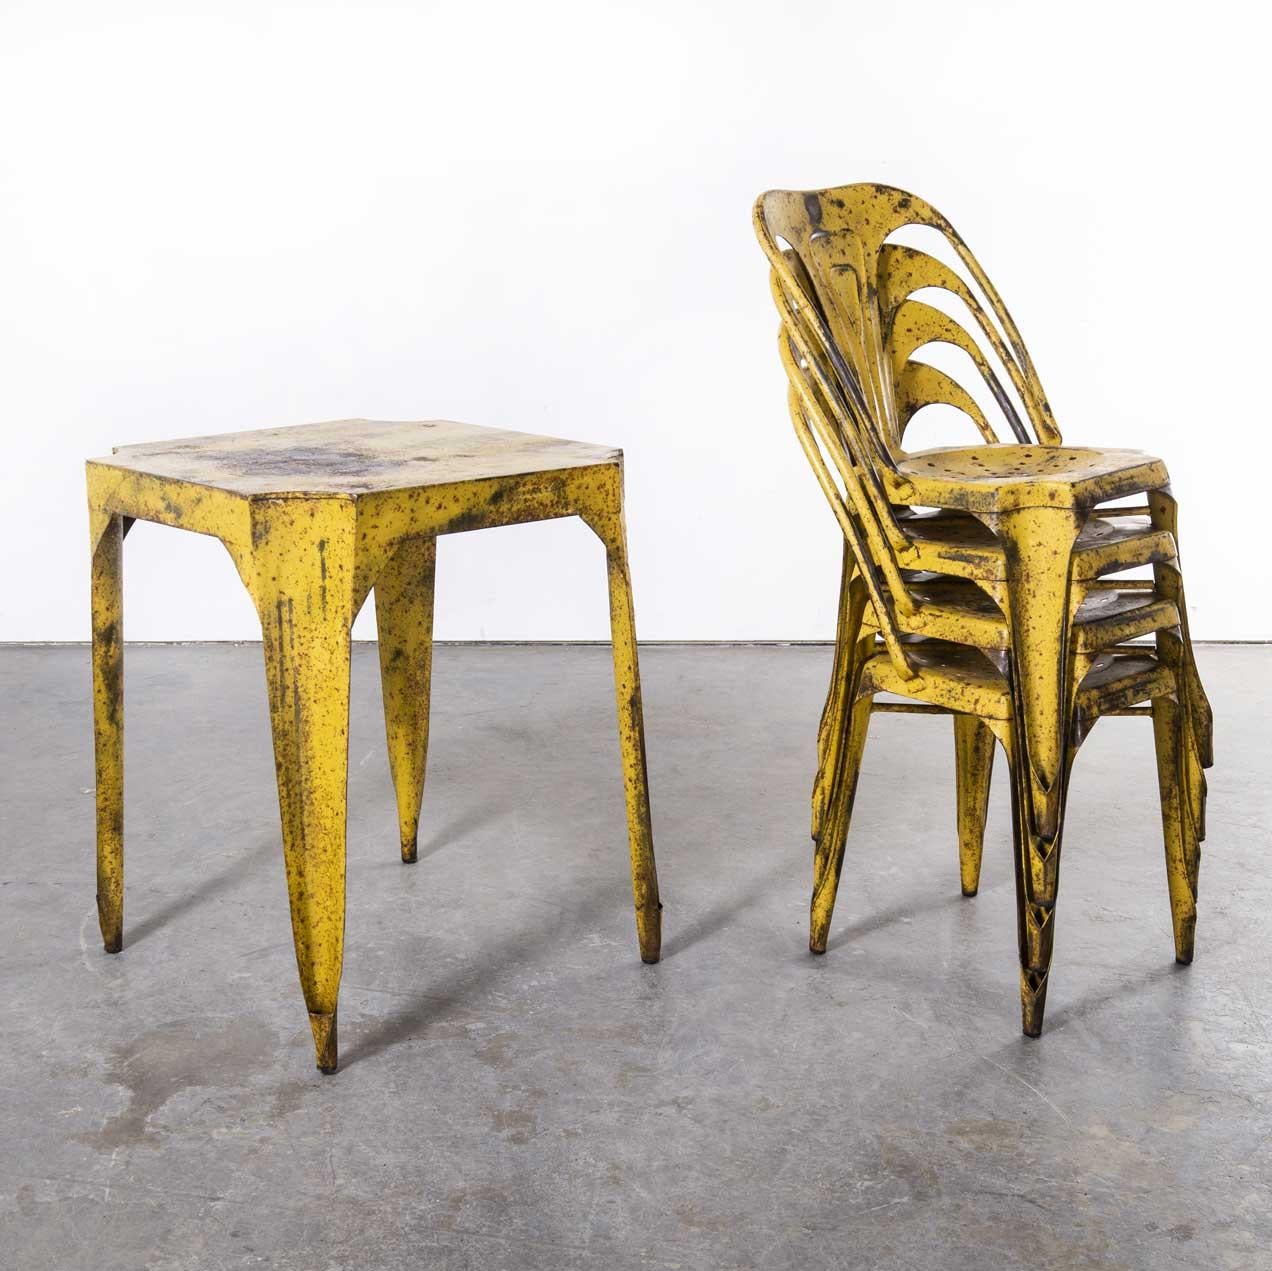 1950's Original French Multipl's Table and Chair Set, Yellow For Sale 2